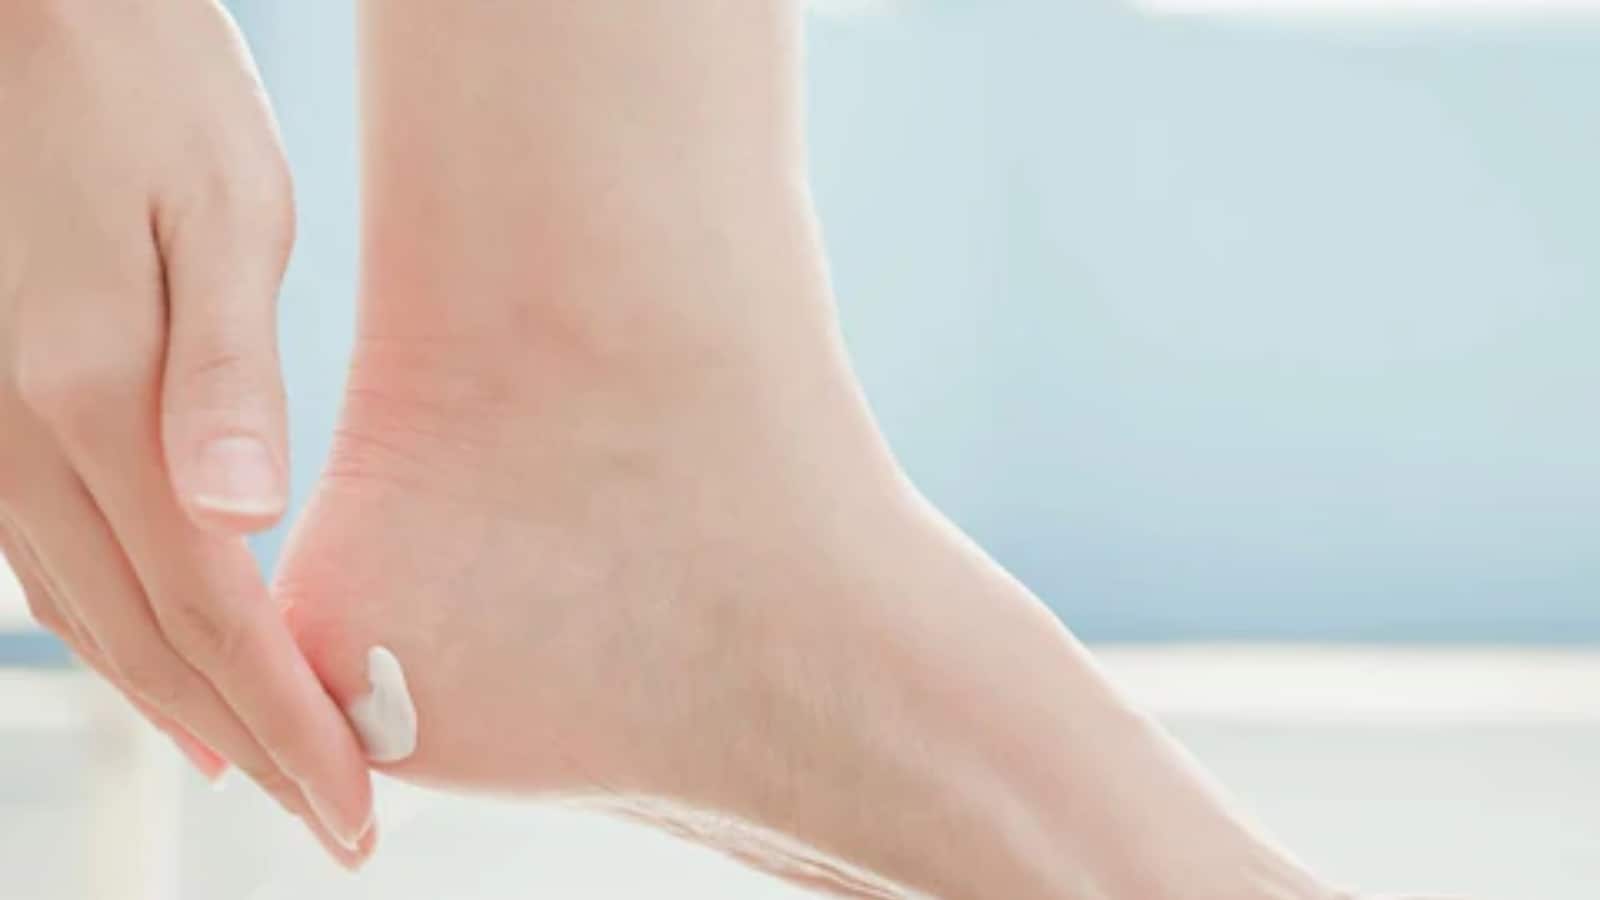 12 Simple Home Remedies for Cracked Heels